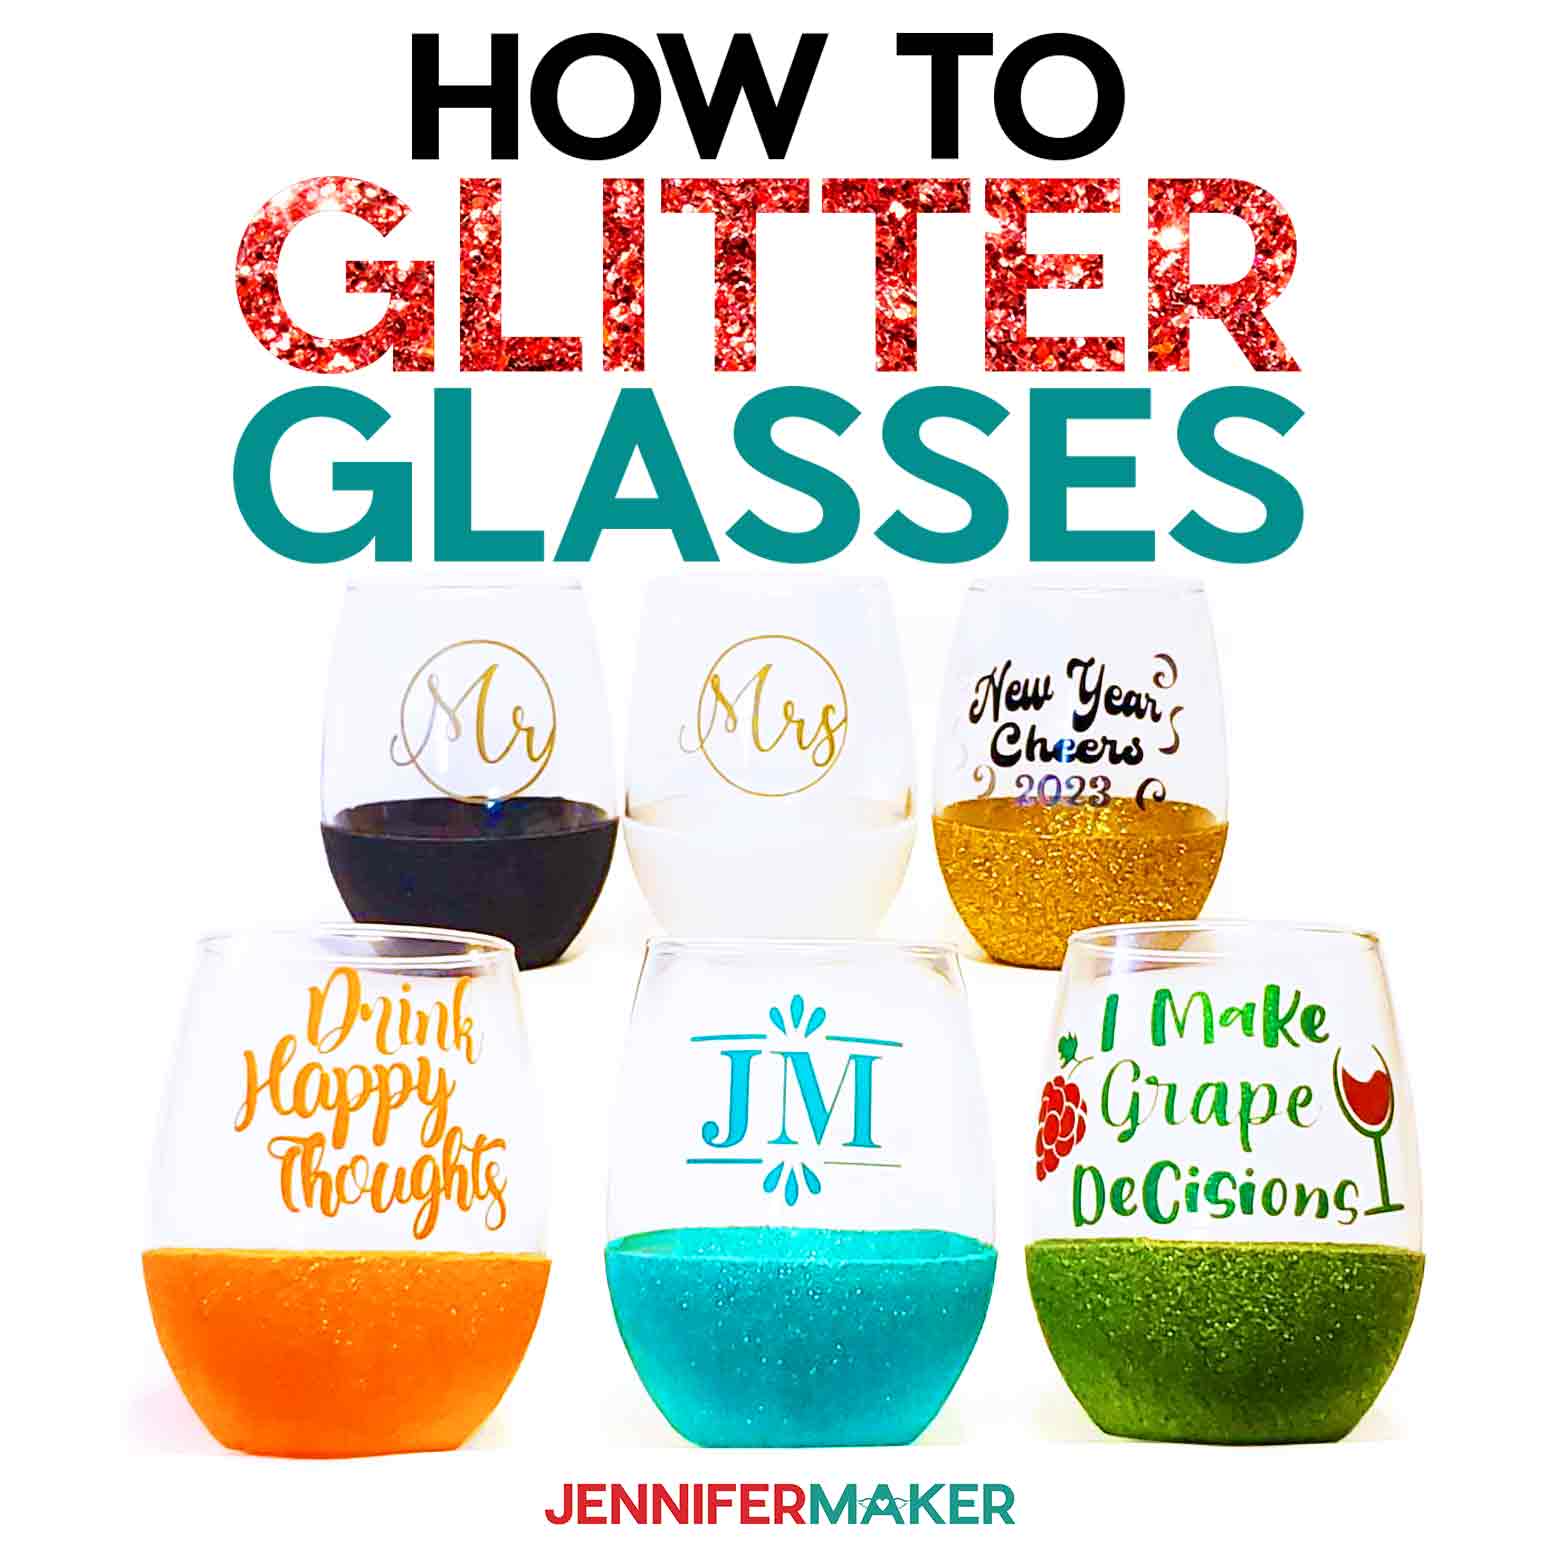 How to Glitter Wine Glasses With Less Mess!